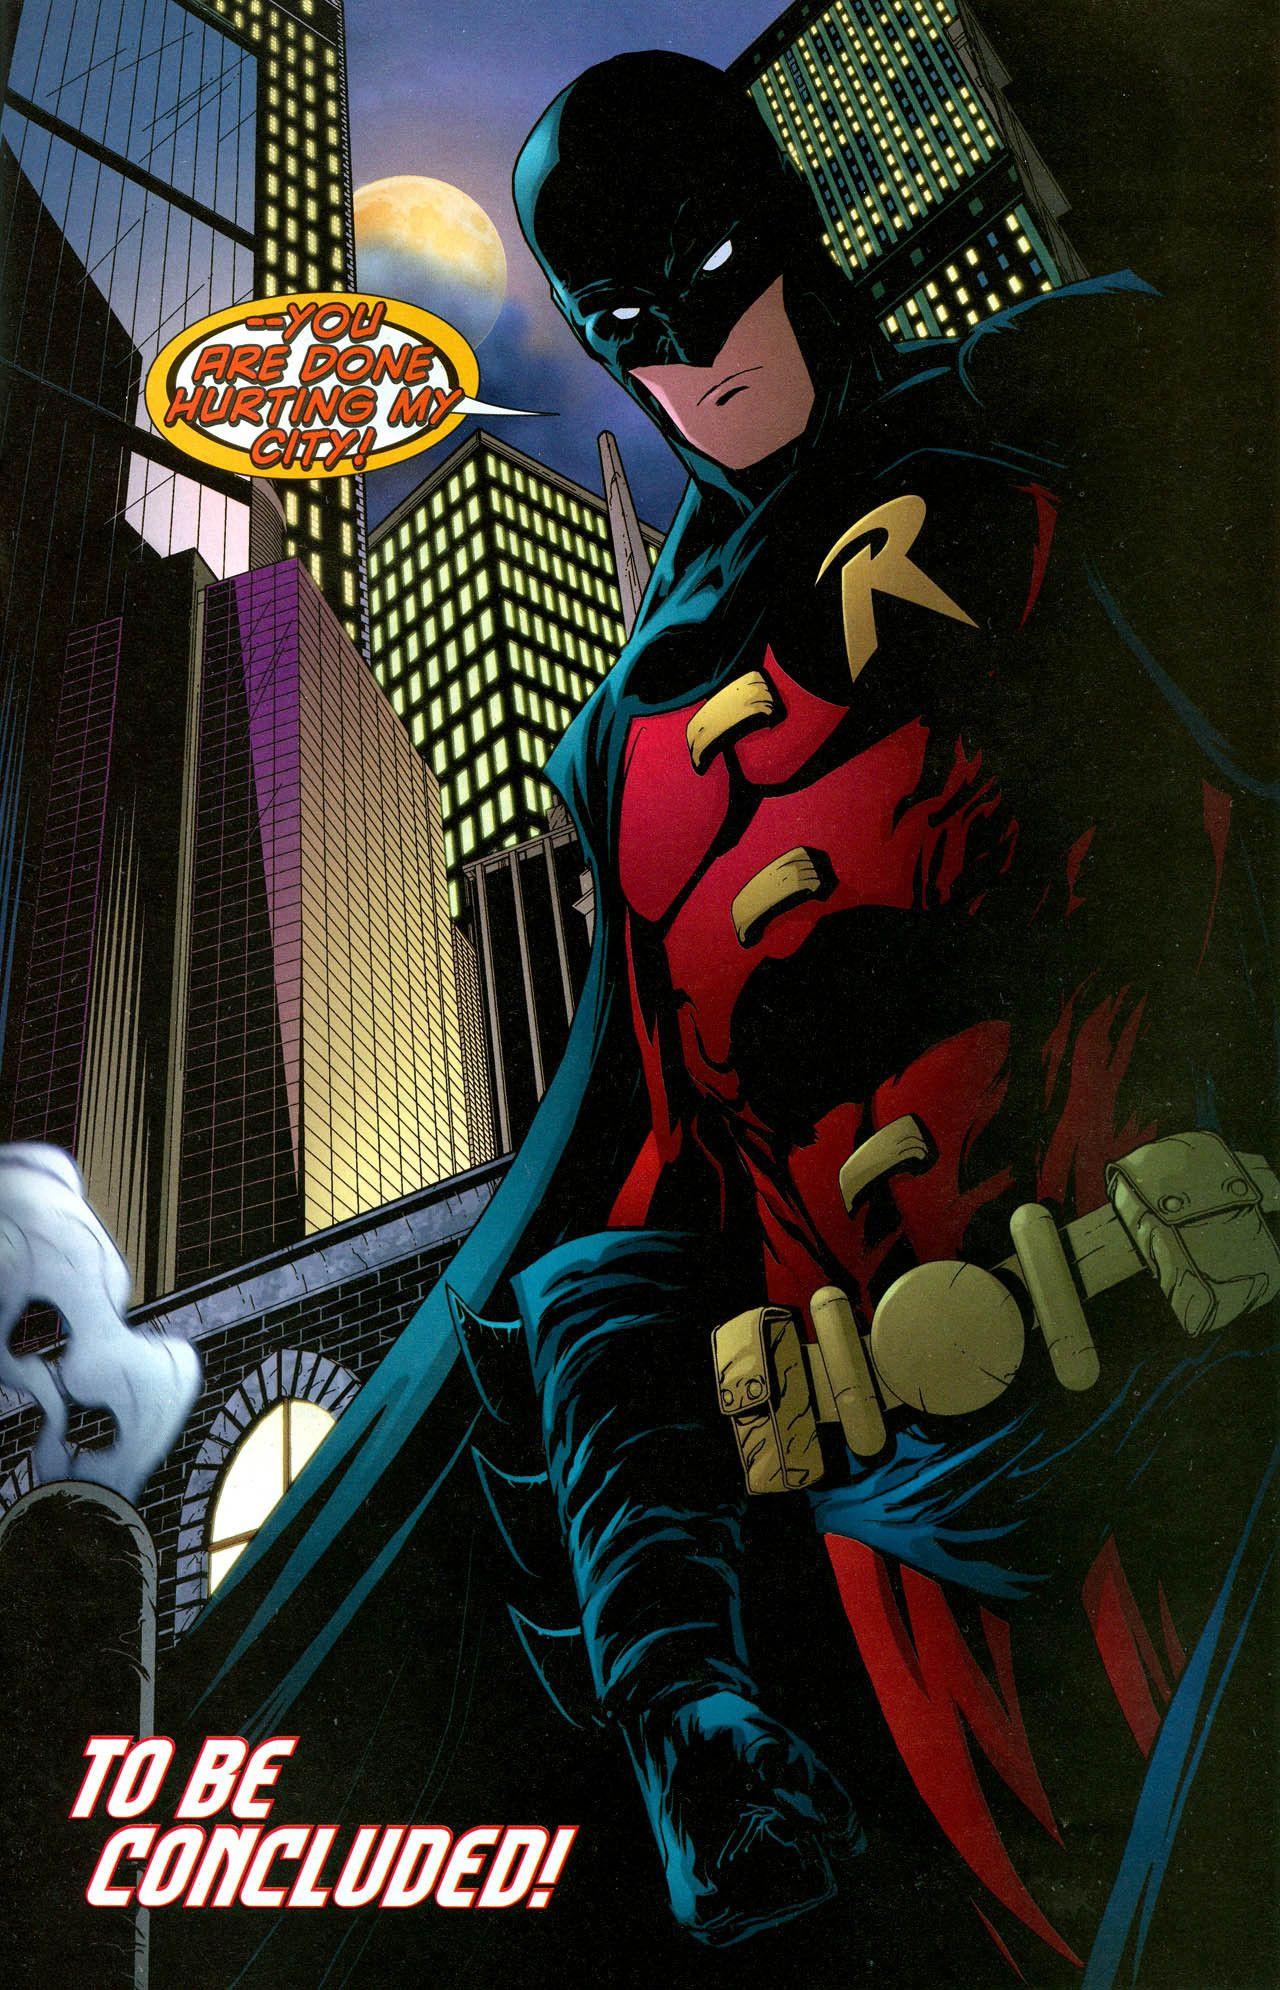 Tim Drake Is The Oldest Robin to Avoid His Dark Potential Future